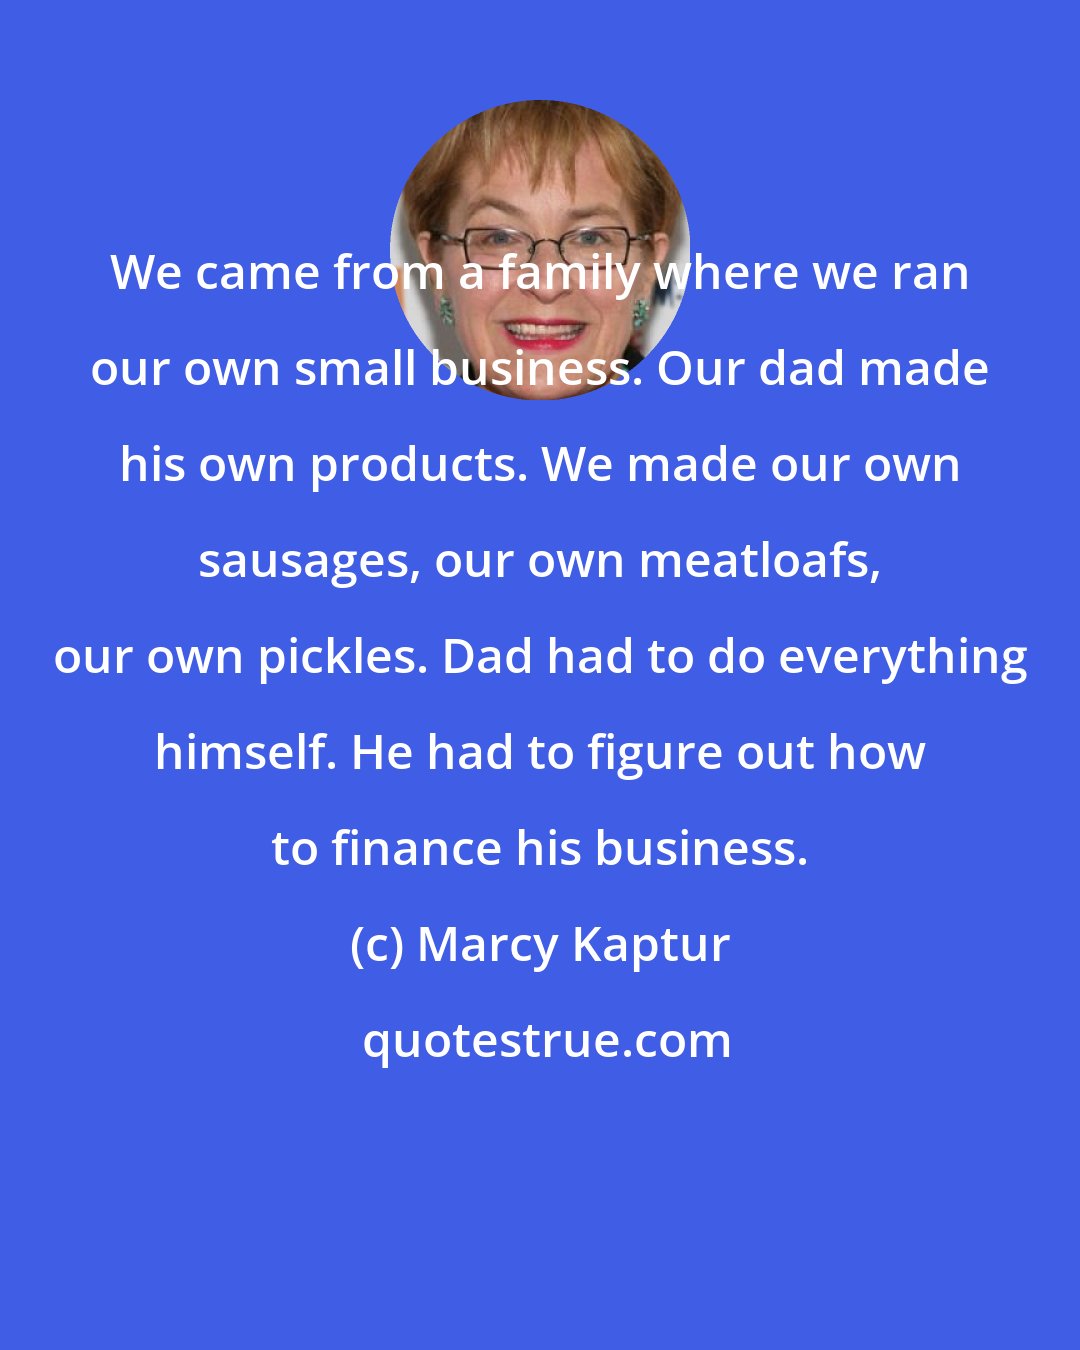 Marcy Kaptur: We came from a family where we ran our own small business. Our dad made his own products. We made our own sausages, our own meatloafs, our own pickles. Dad had to do everything himself. He had to figure out how to finance his business.